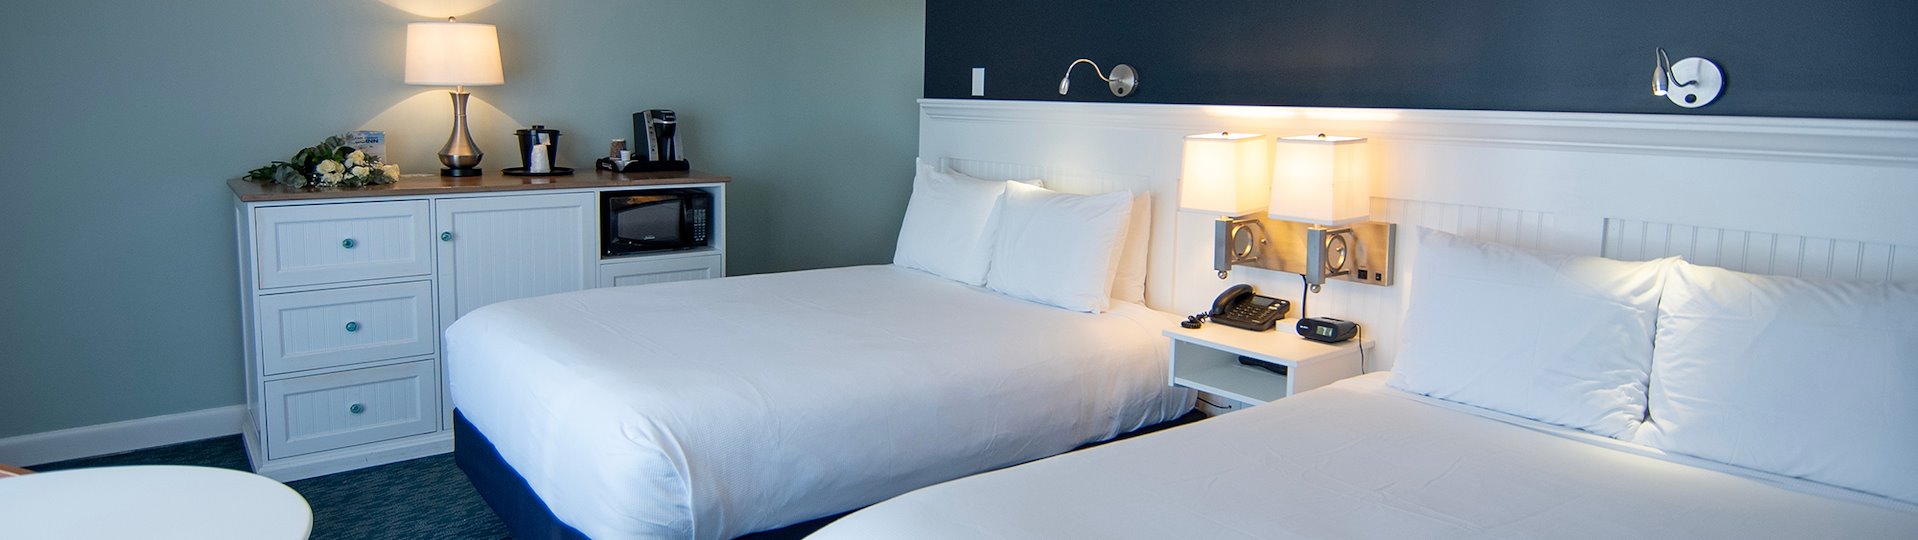 Rooms & Suites - Cape Colony Inn, Provincetown, MA